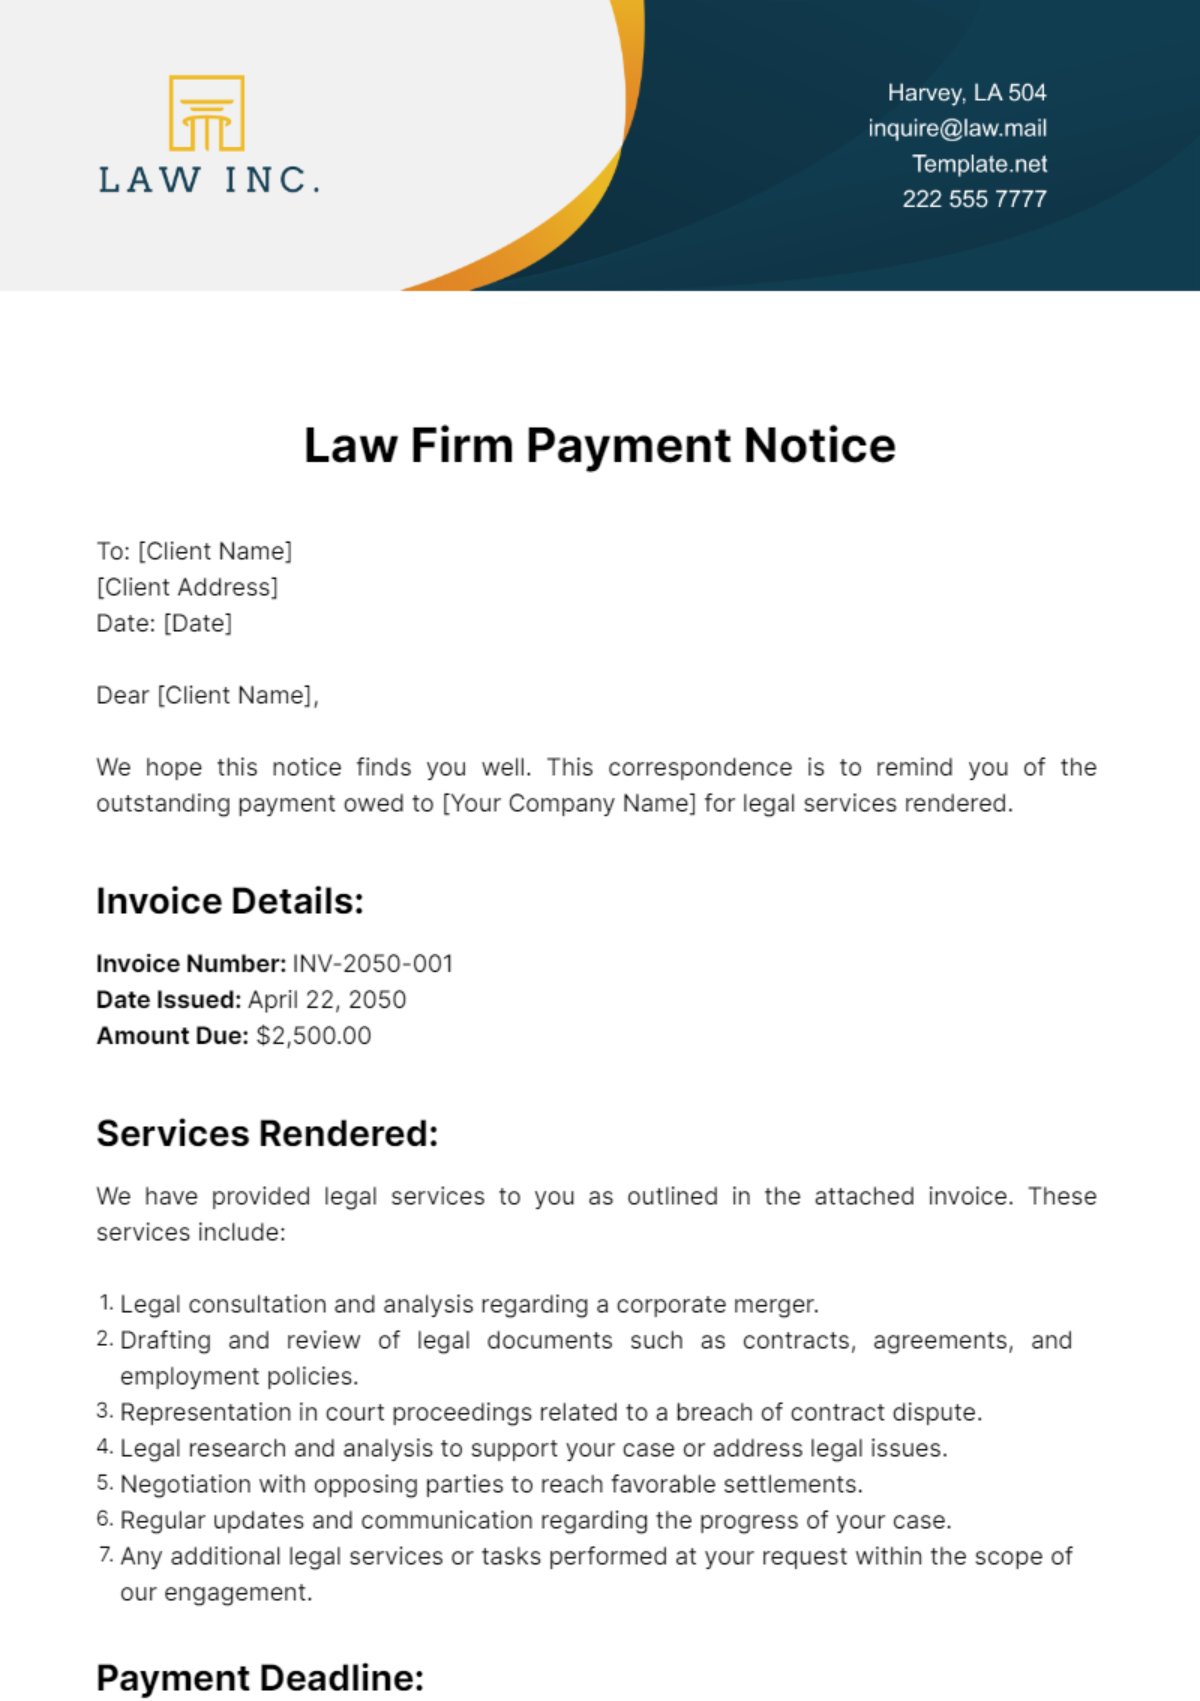 Law Firm Payment Notice Template